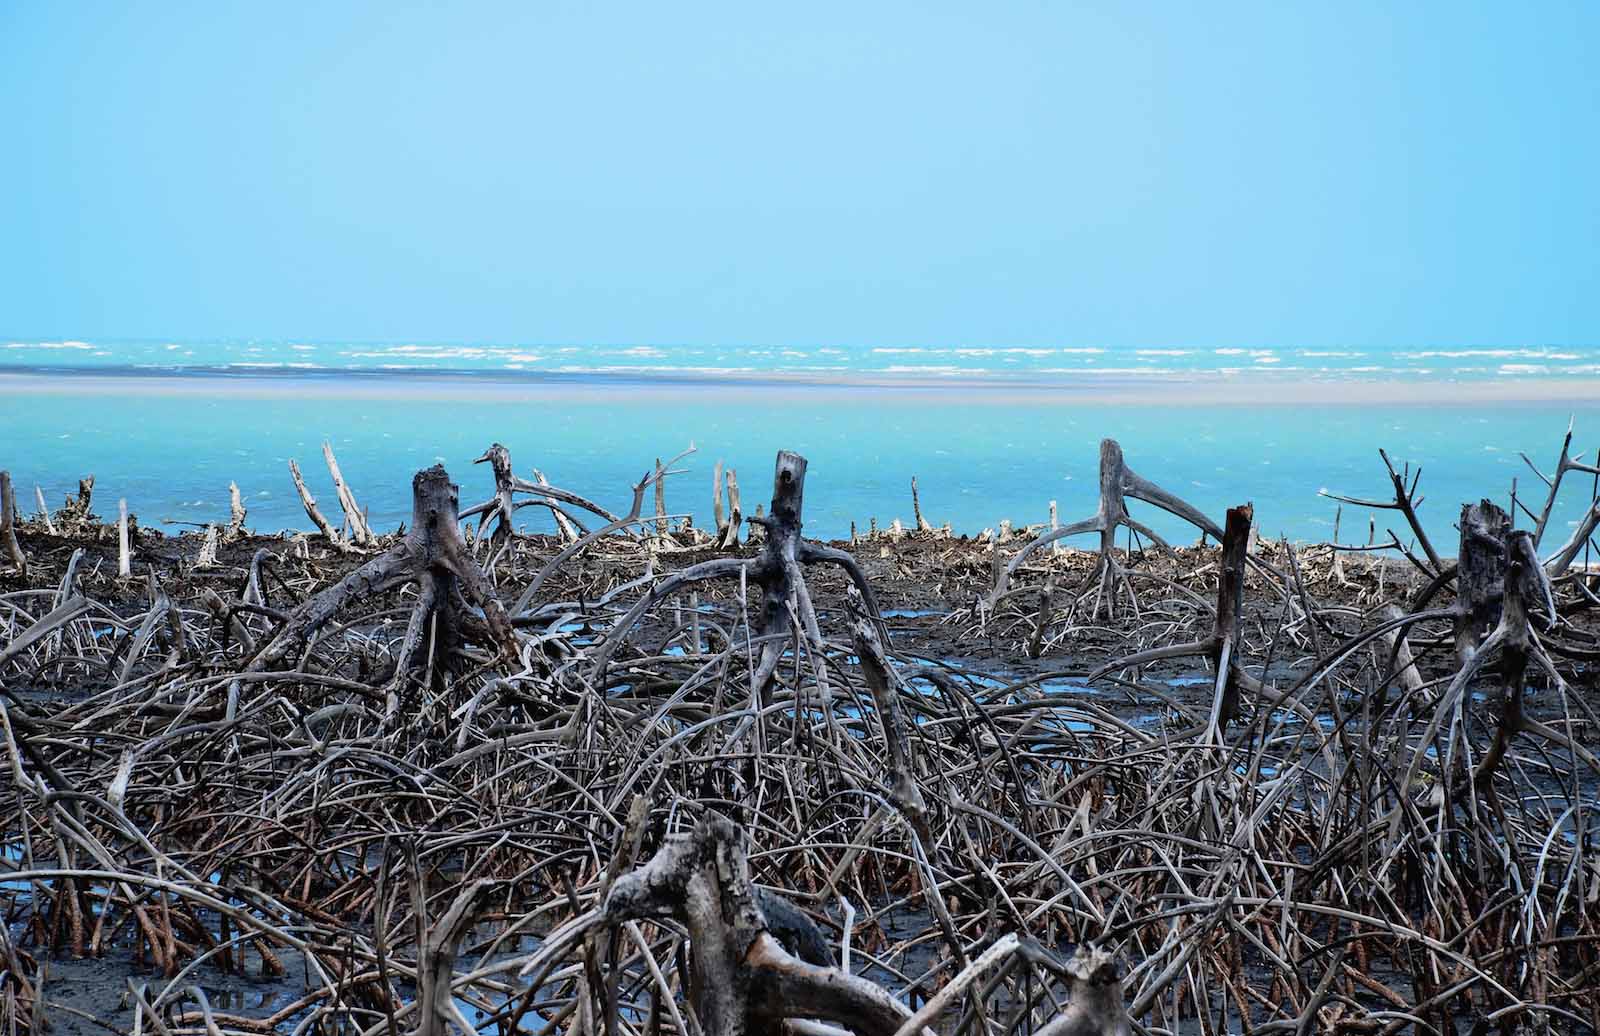 Stock image of a degraded coastal mangrove forest. Image: iStock/Getty Images